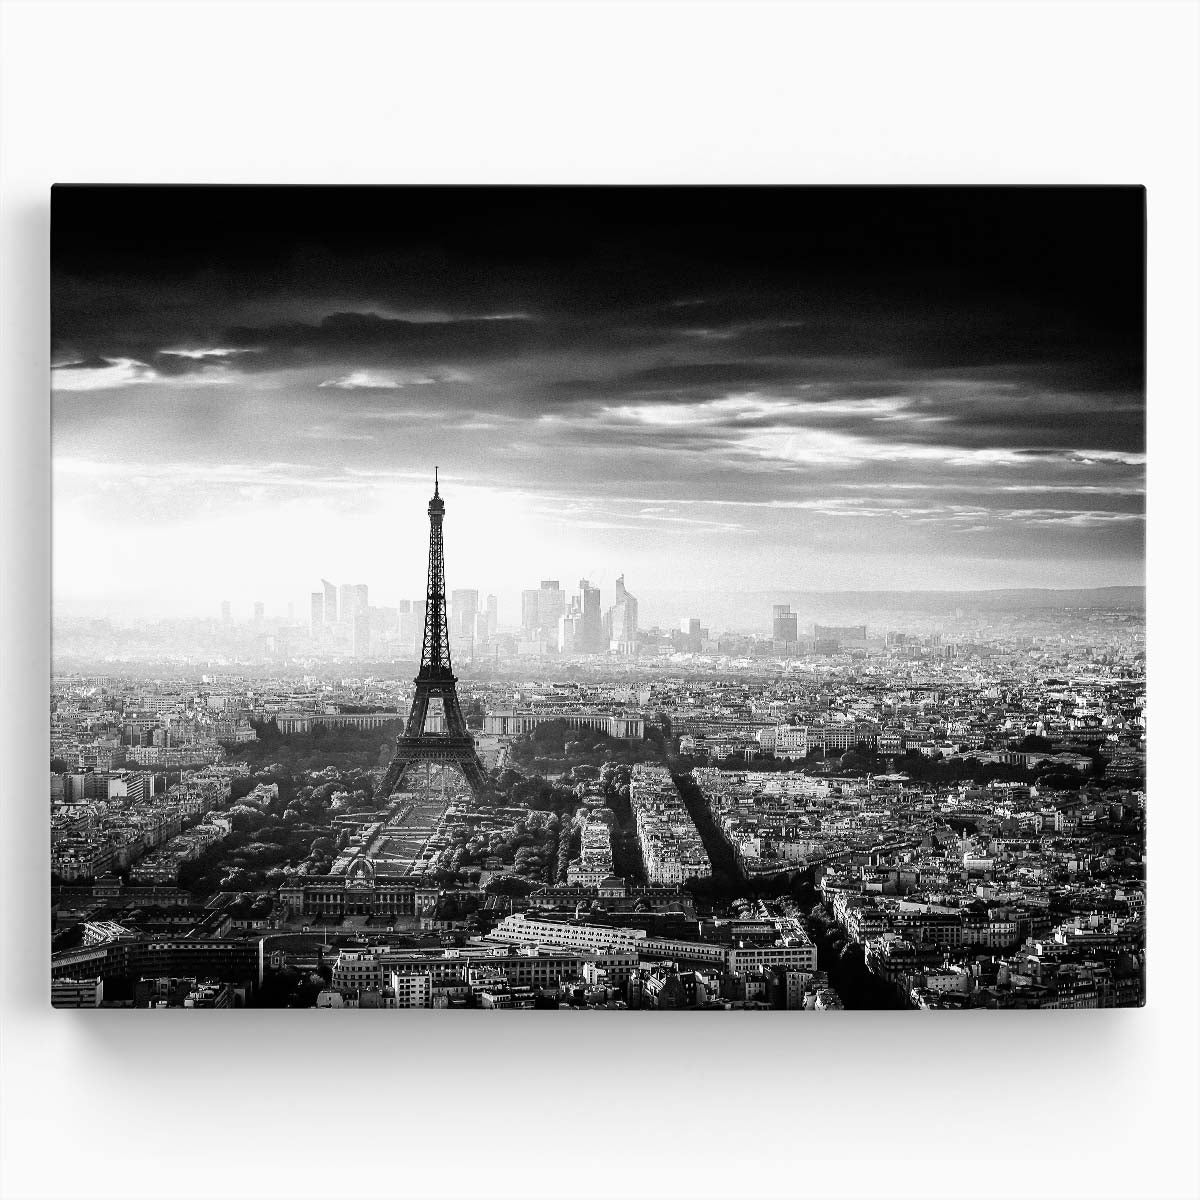 Paris Skyline Foggy Morning Black & White Photography Wall Art by Luxuriance Designs. Made in USA.